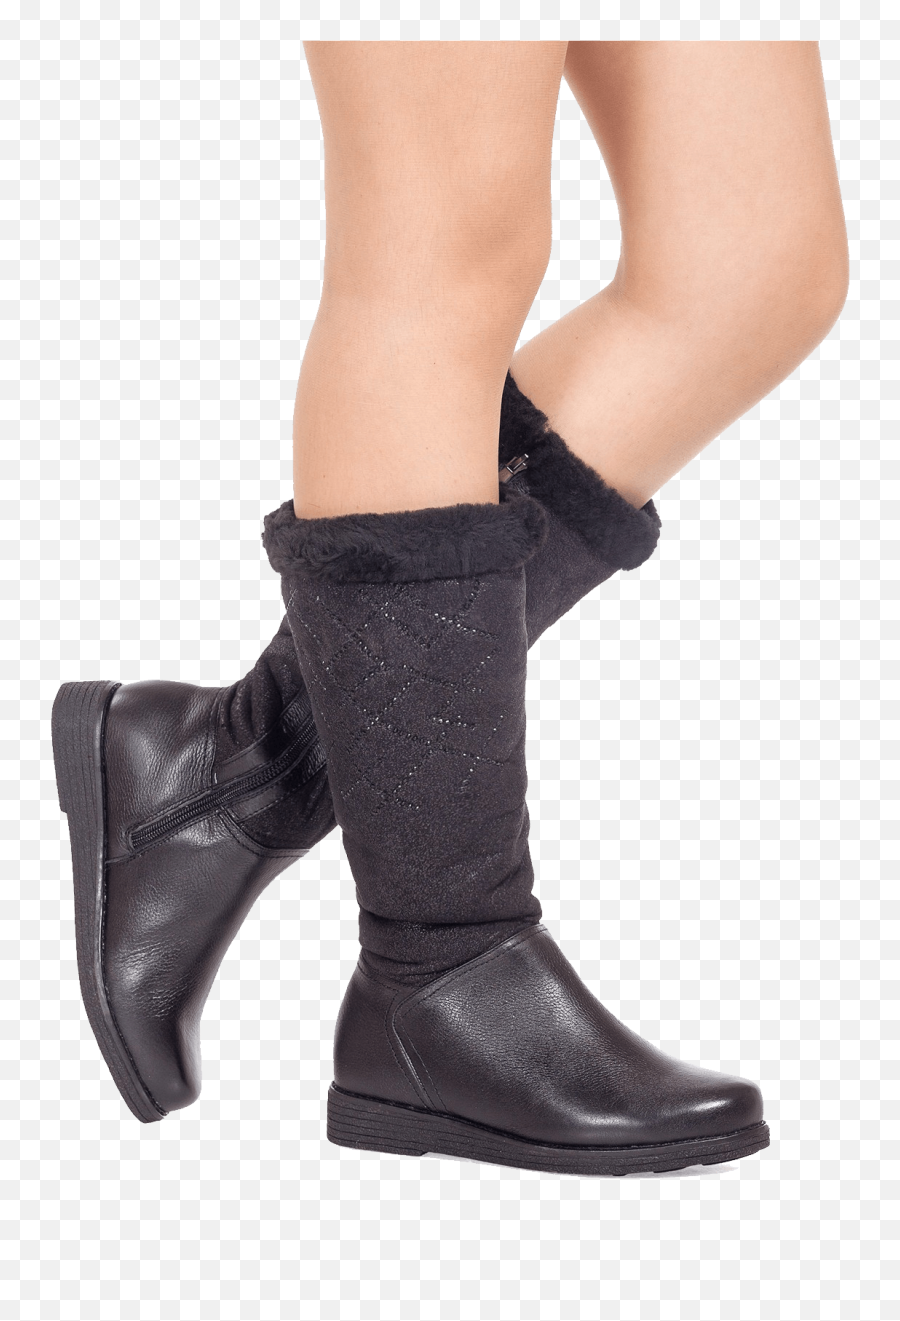 Download Boots - Png Shoes With Men Leg,Boots Png